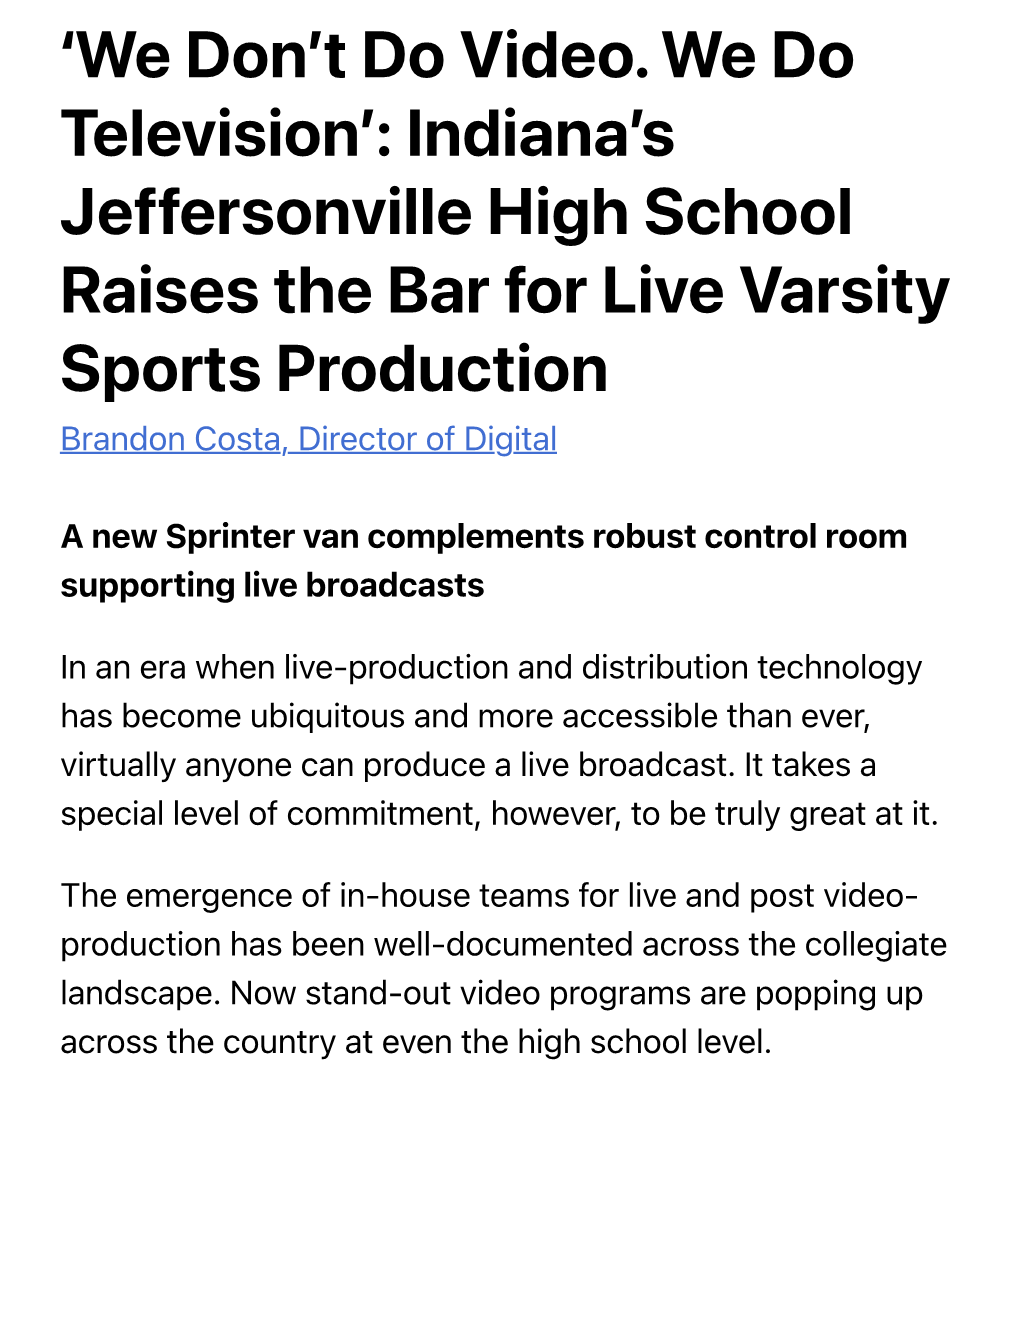 'We Don't Do Video. We Do Television': Indiana's Jeffersonville High School Raises the Bar for Live Varsity Sports Produ